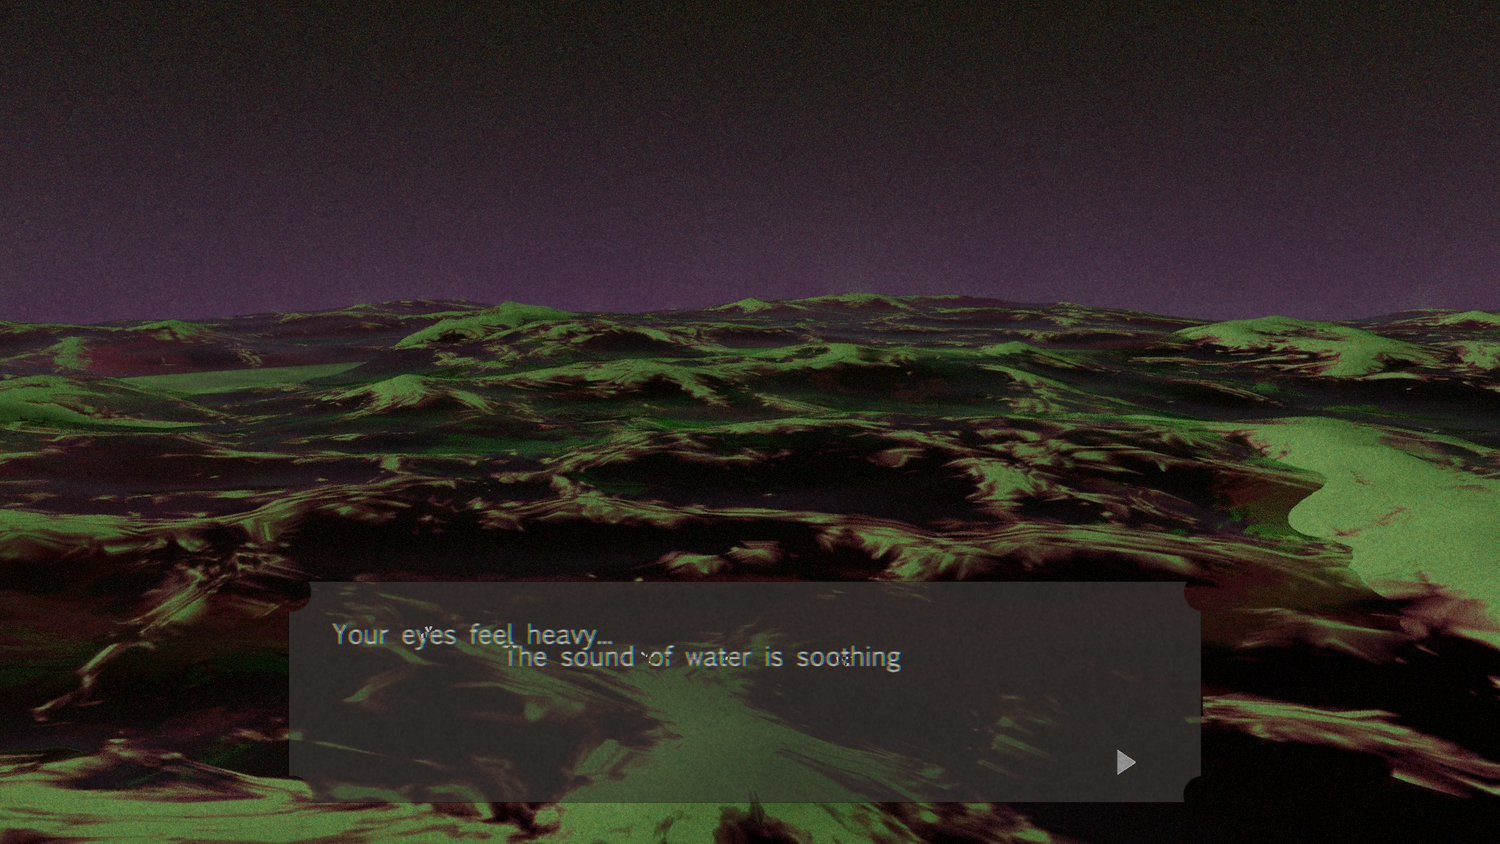 3D rendering of a sea in the horizon, in shades of purple, under a purple sky with green reflections